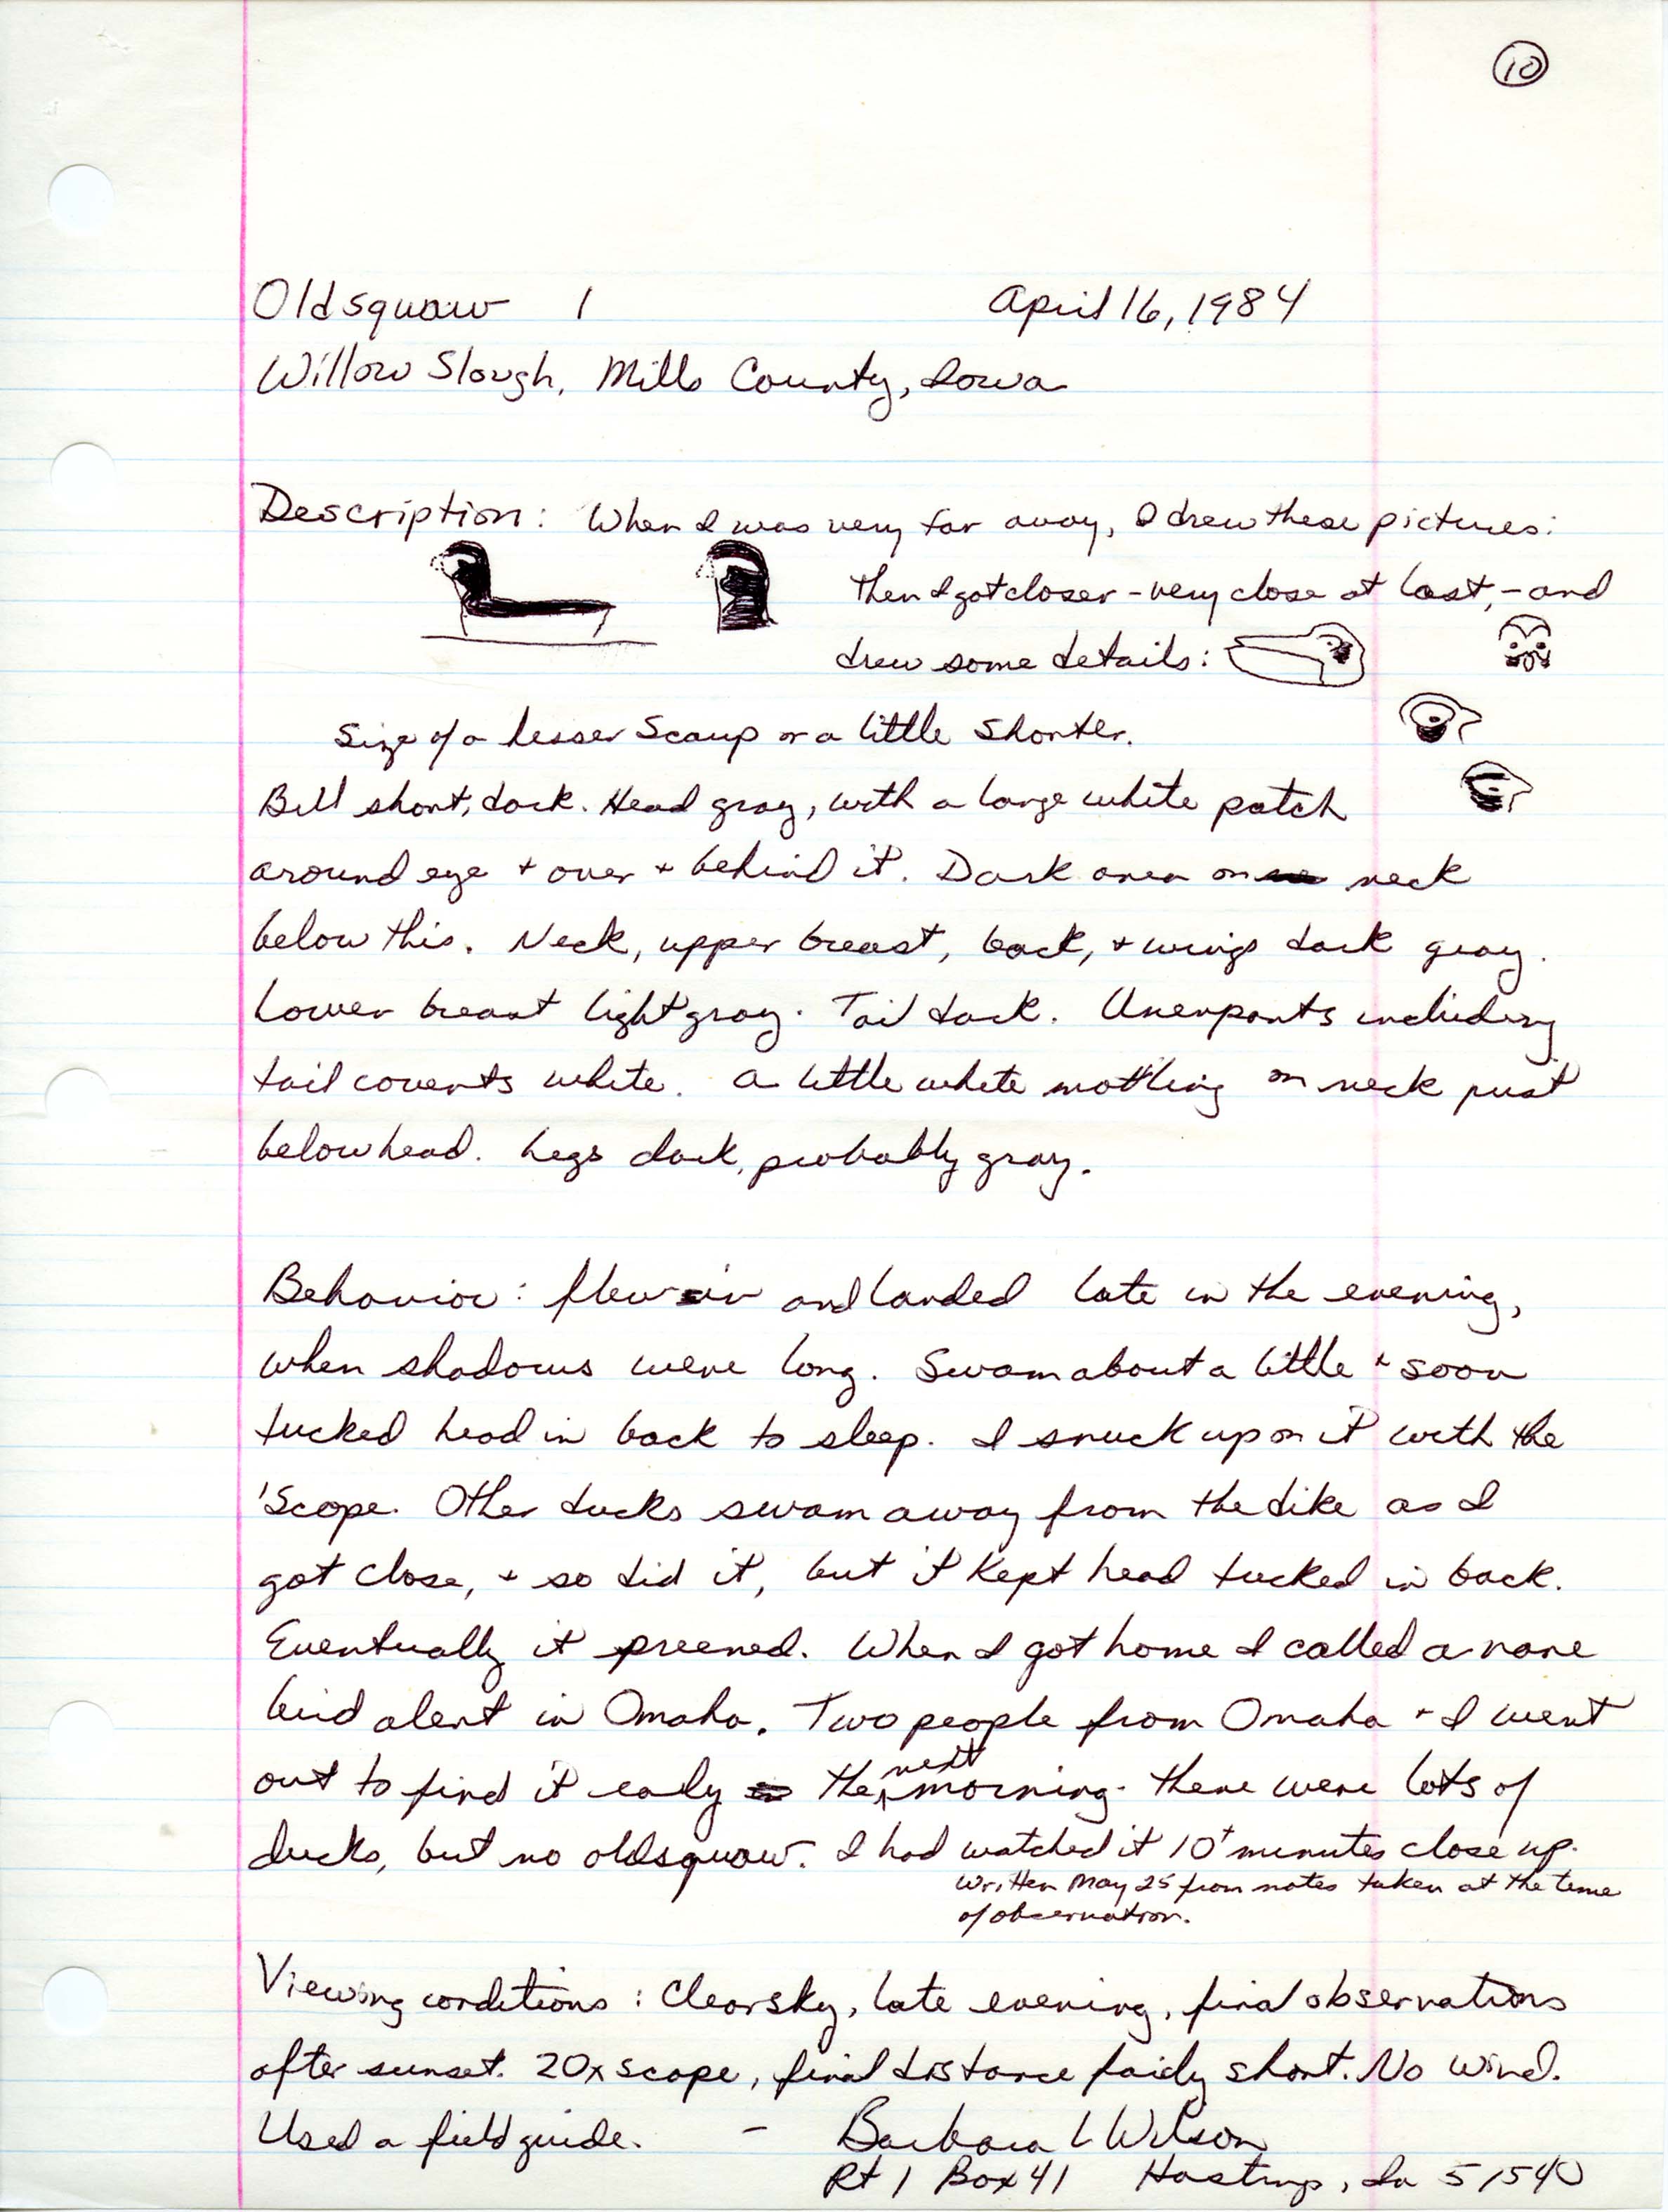 Rare bird documentation form for Long-tailed Duck at Willow Slough, 1984